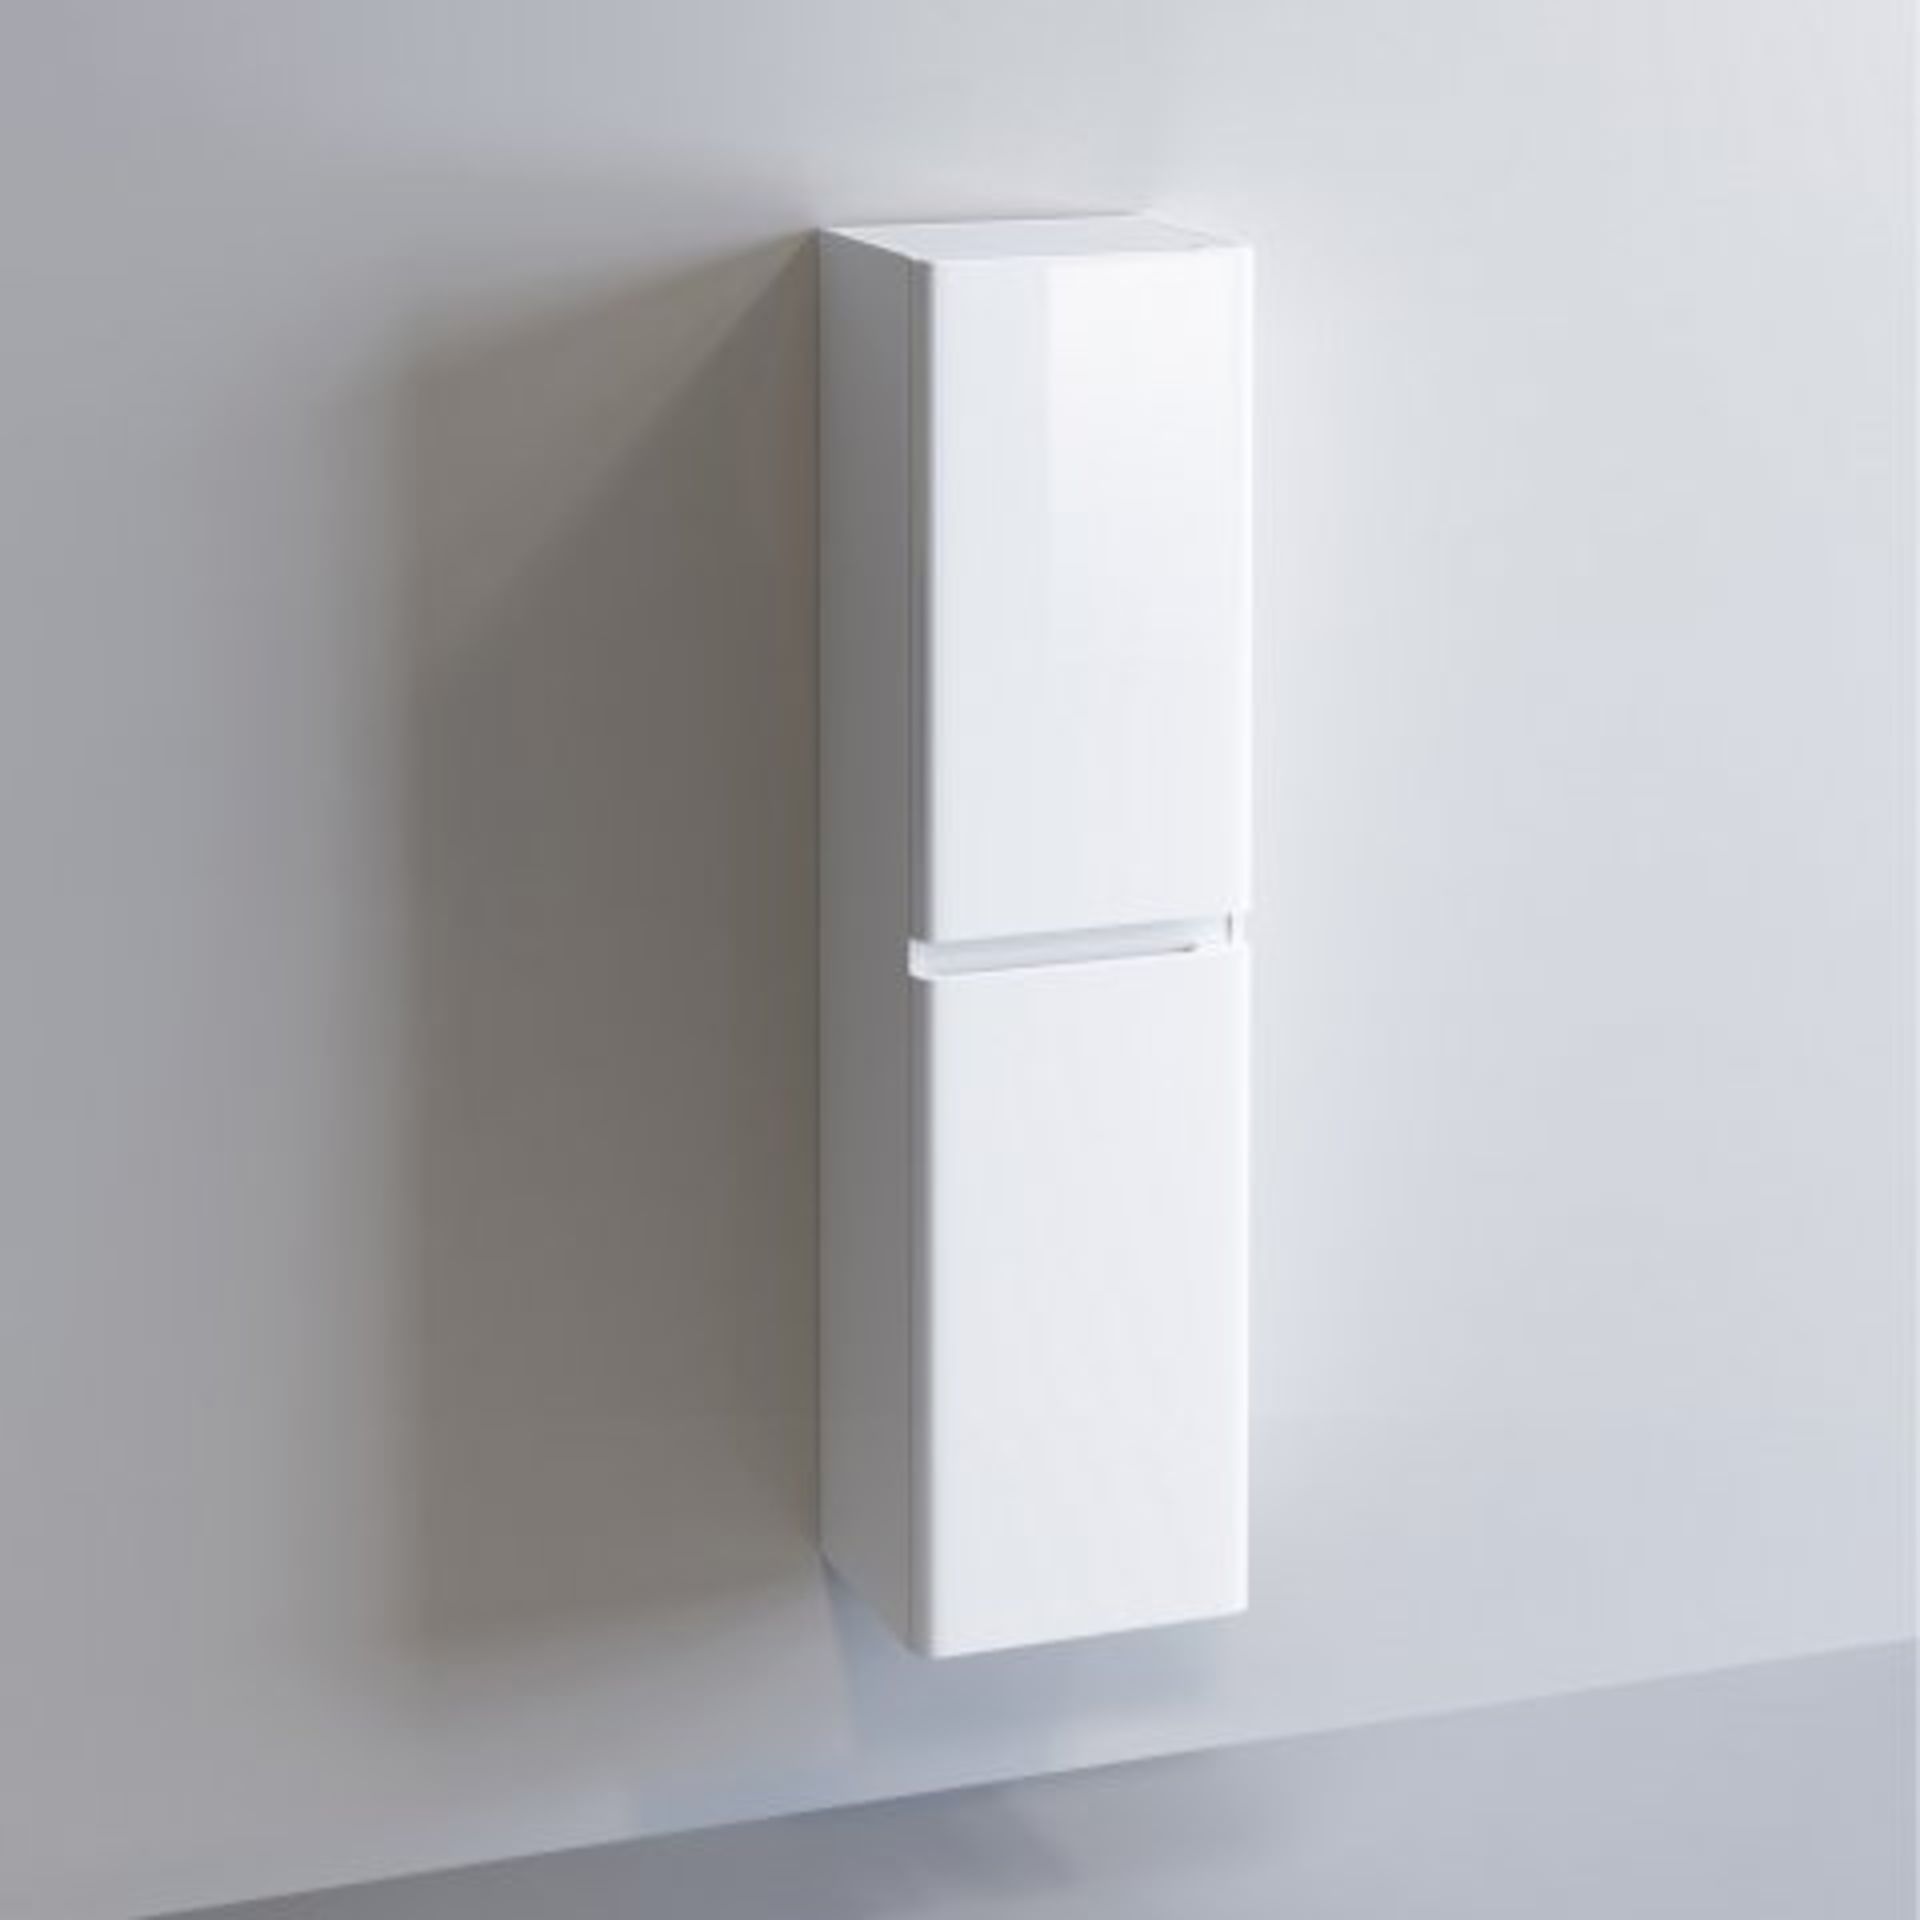 (O25) 1400mm Denver II Gloss White Tall Storage Cabinet - Wall Hung. RRP £299.99. With its gorgeous, - Image 3 of 3